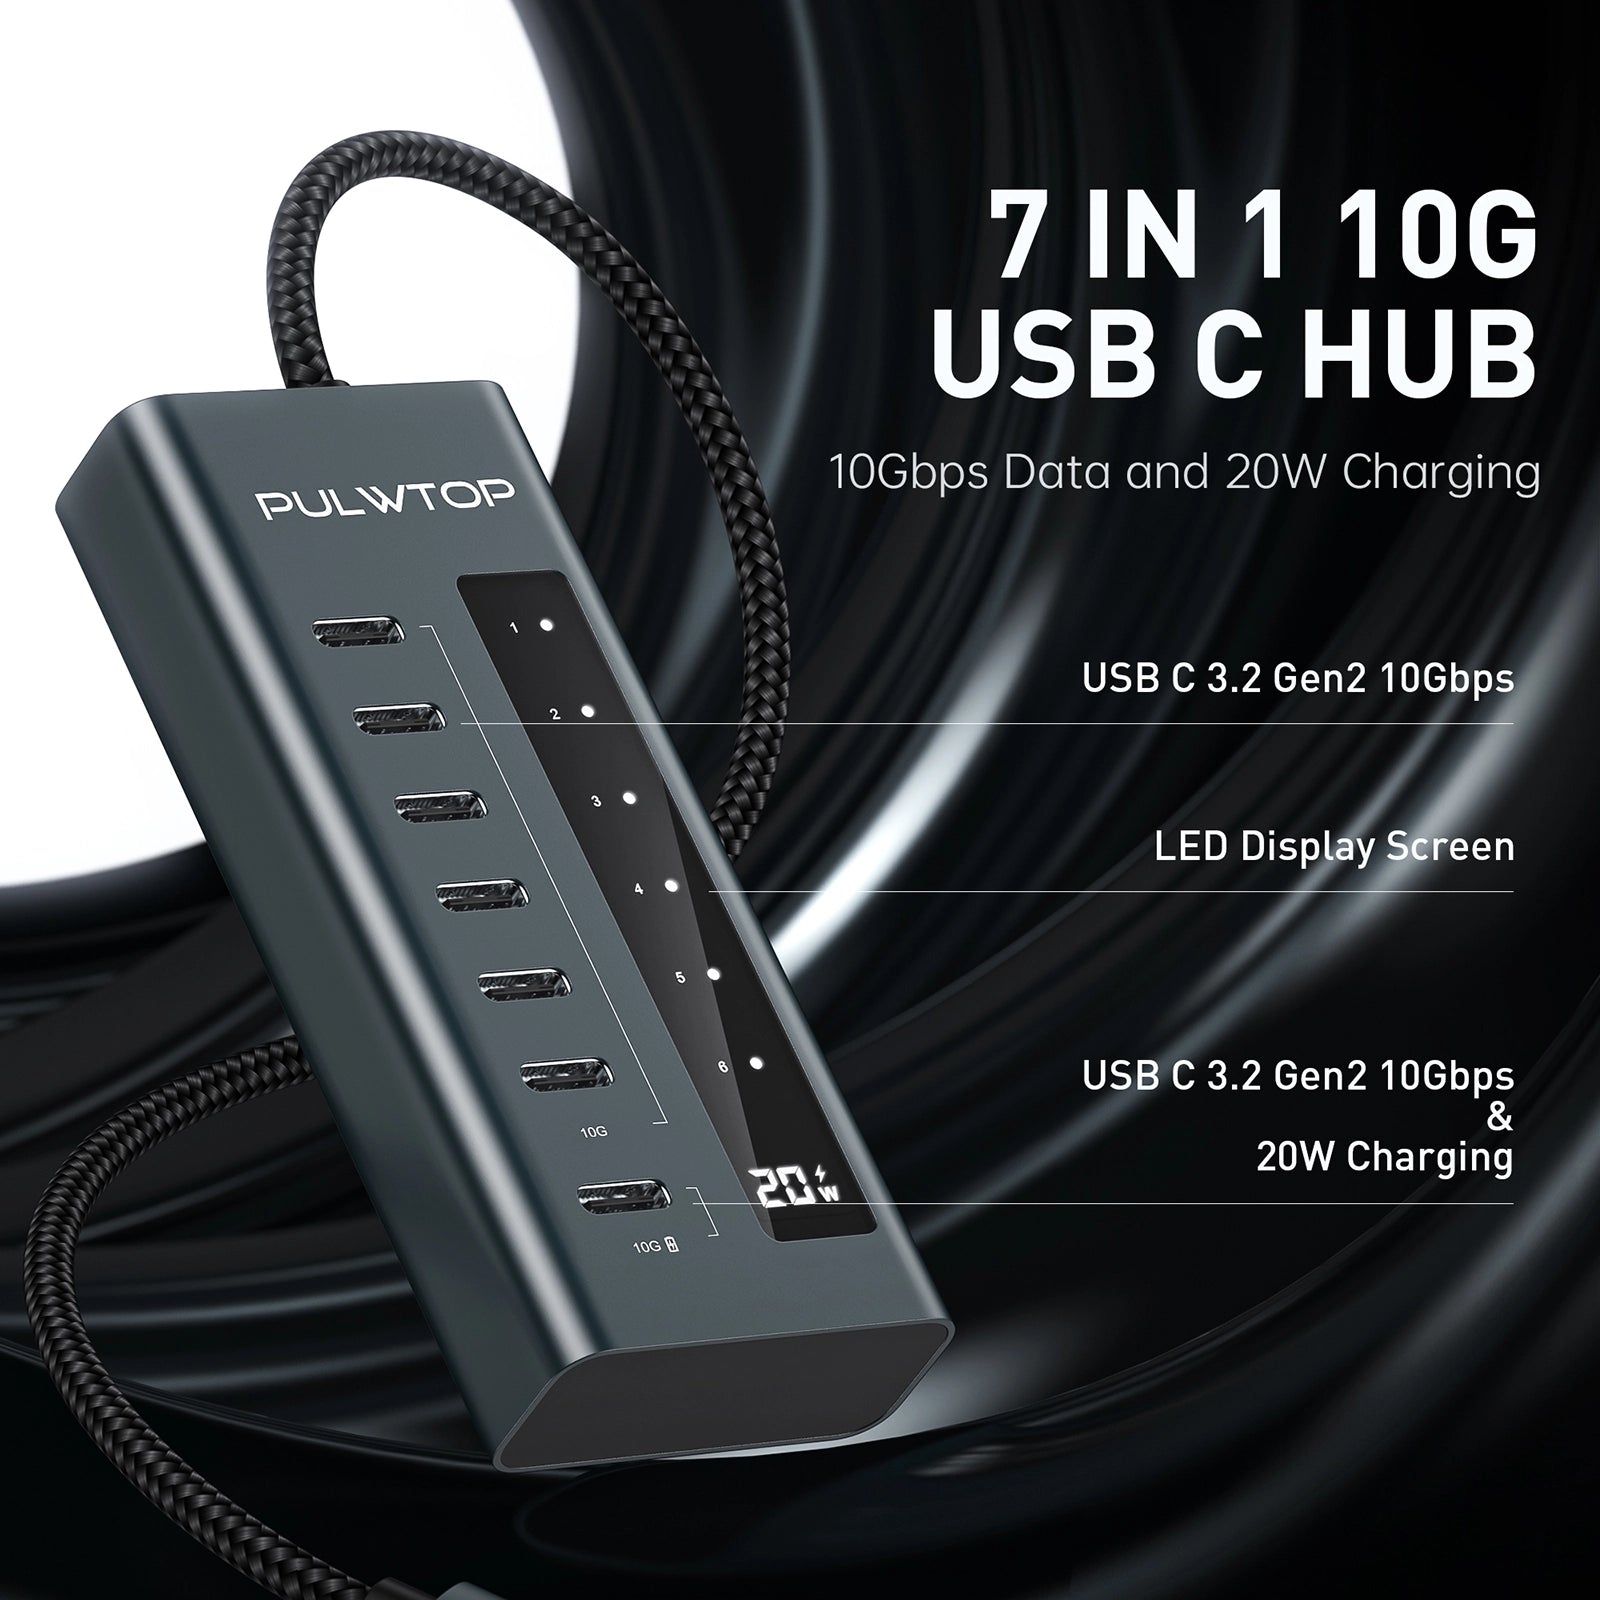 PULWTOP 7-in-1 10Gbps USB C supports data and charging (non-video) for iMac, MacBook Pro/Air, iPad, XPS